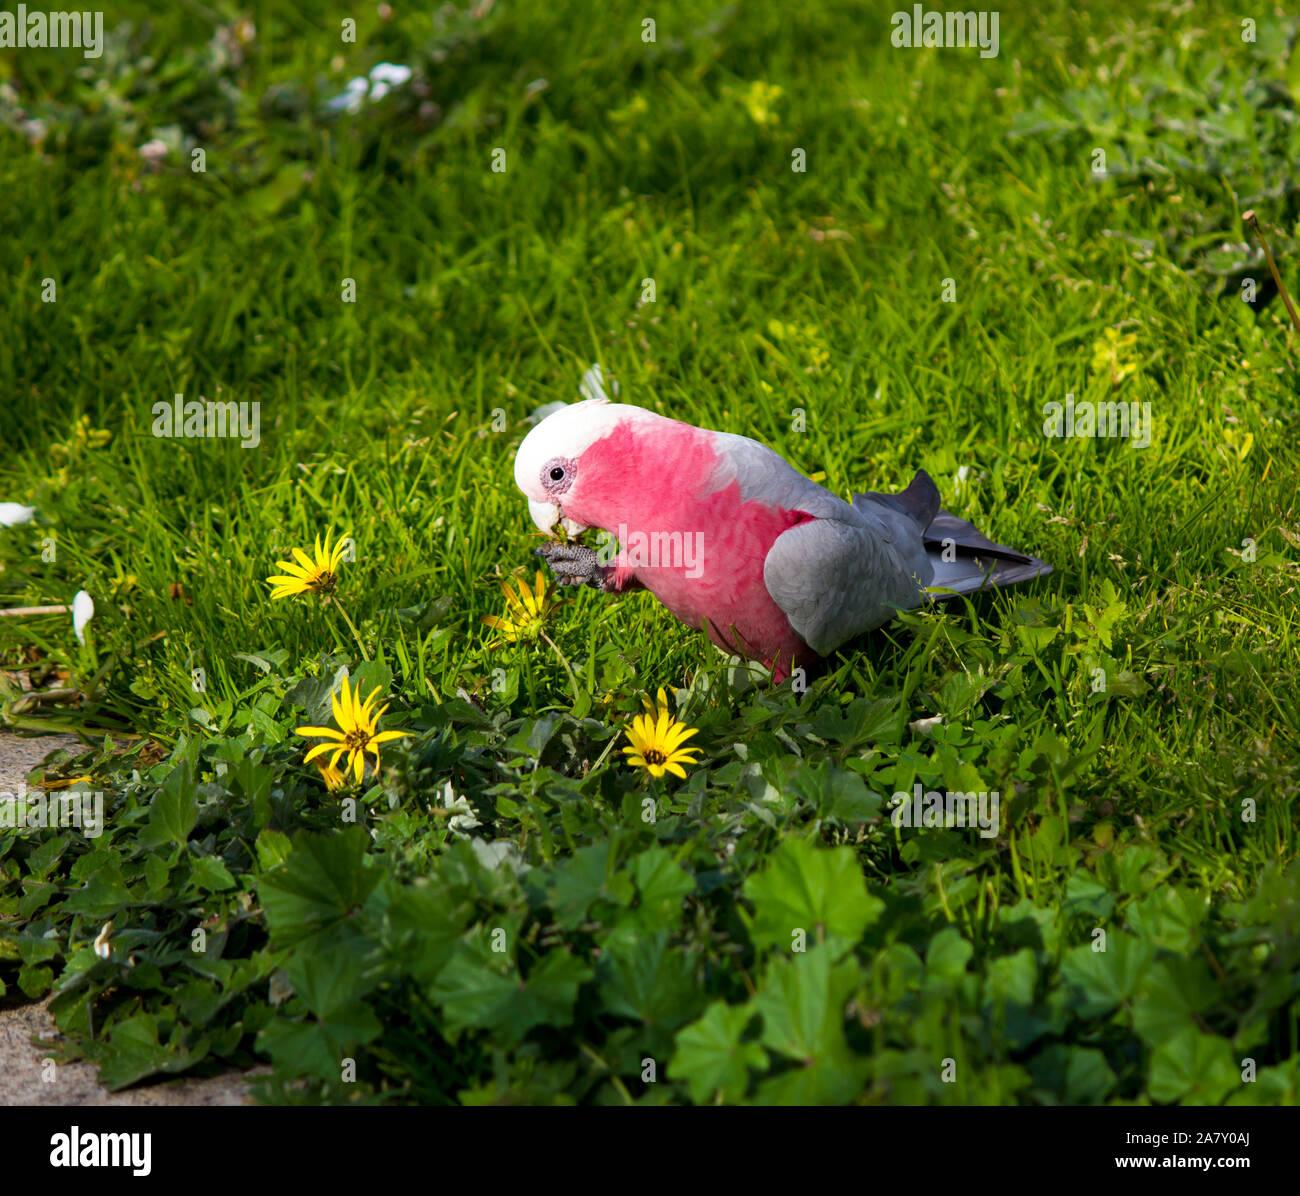 A curious Australian pink and grey galah Eolophus roseicapilla searches for juicy cape weed flower tips to eat from the green lawn in the estuary park. Stock Photo